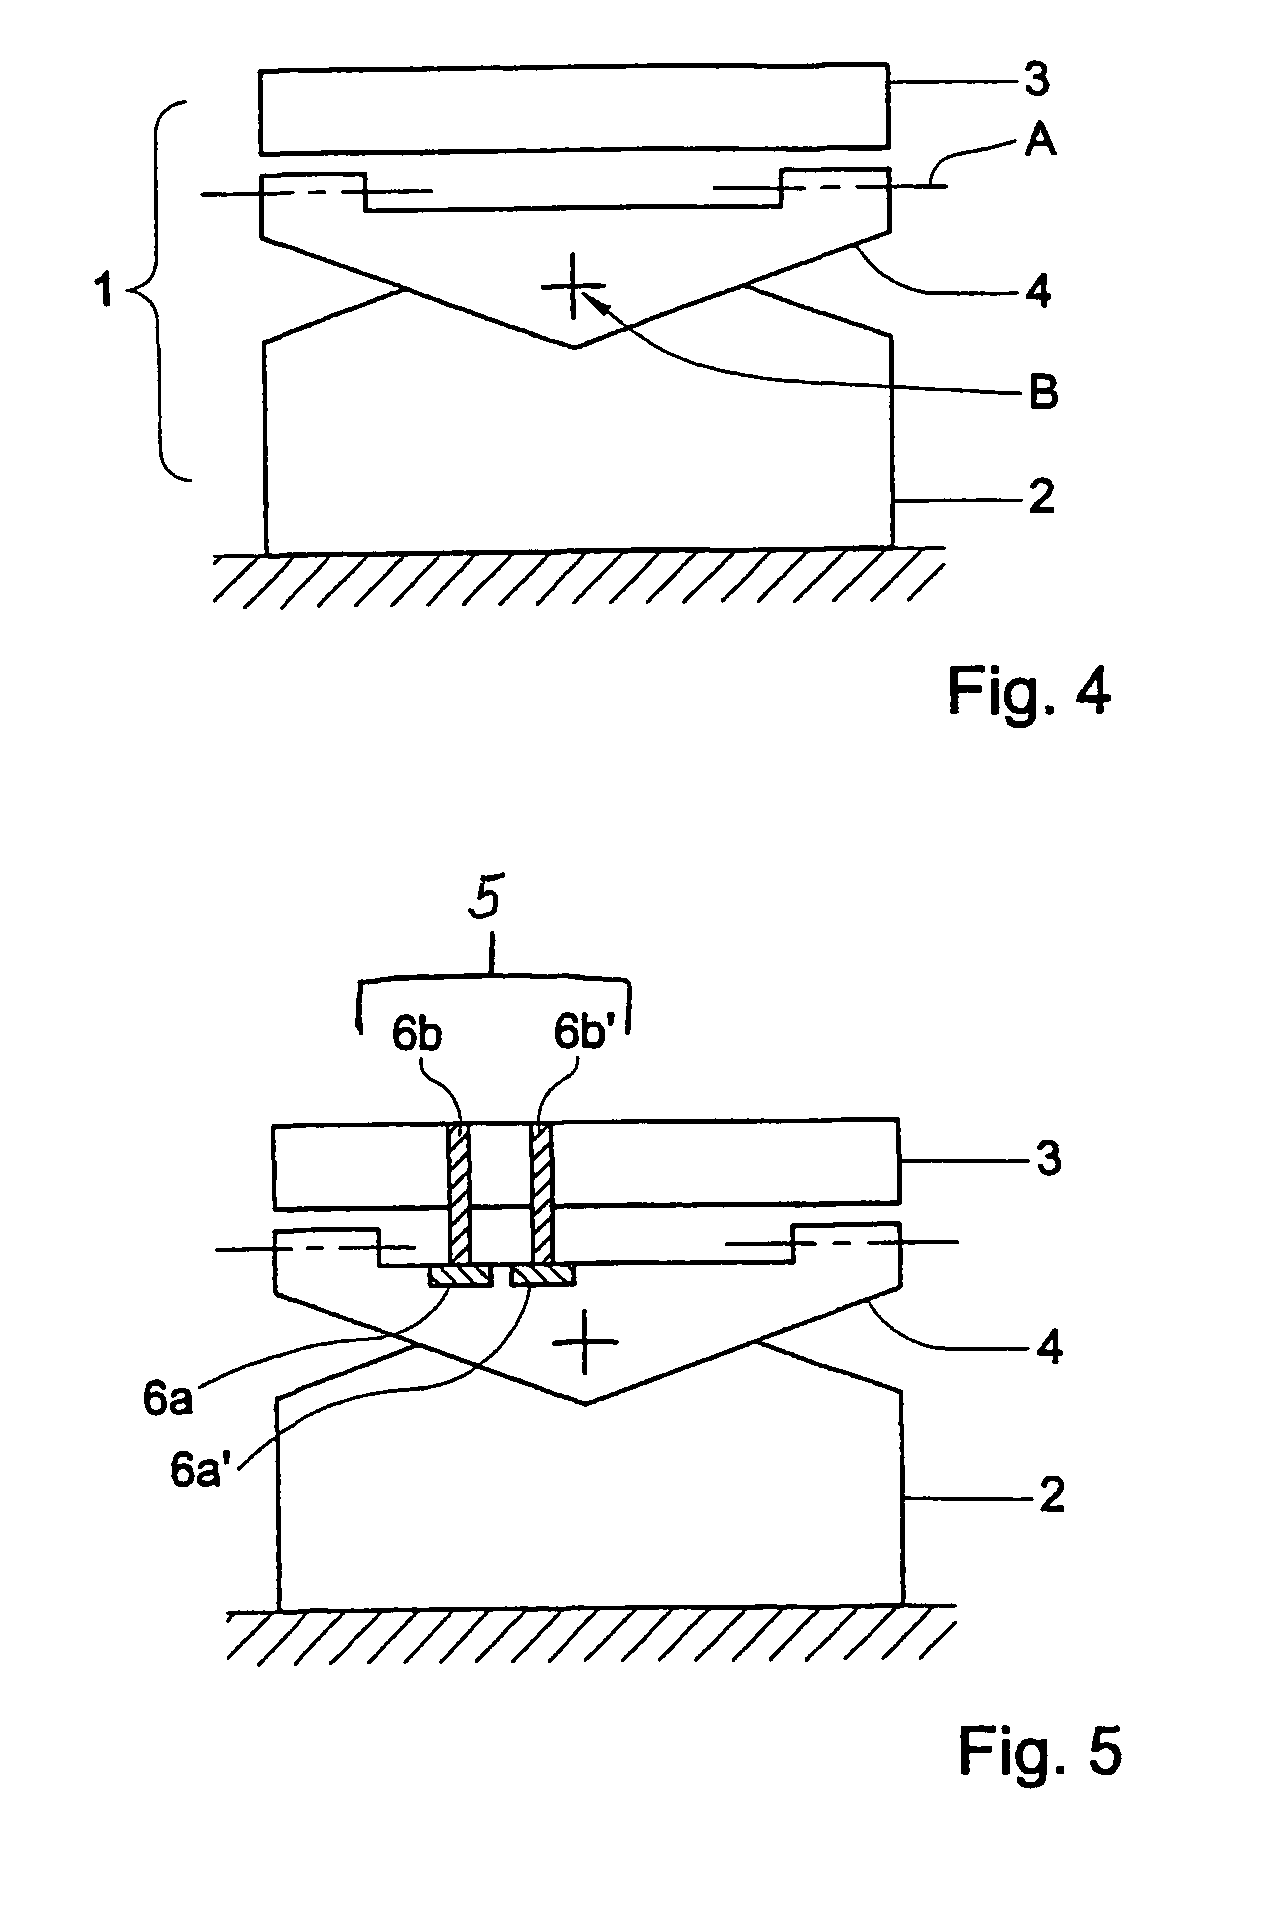 Mirror adjustment mechanism with electrical connection